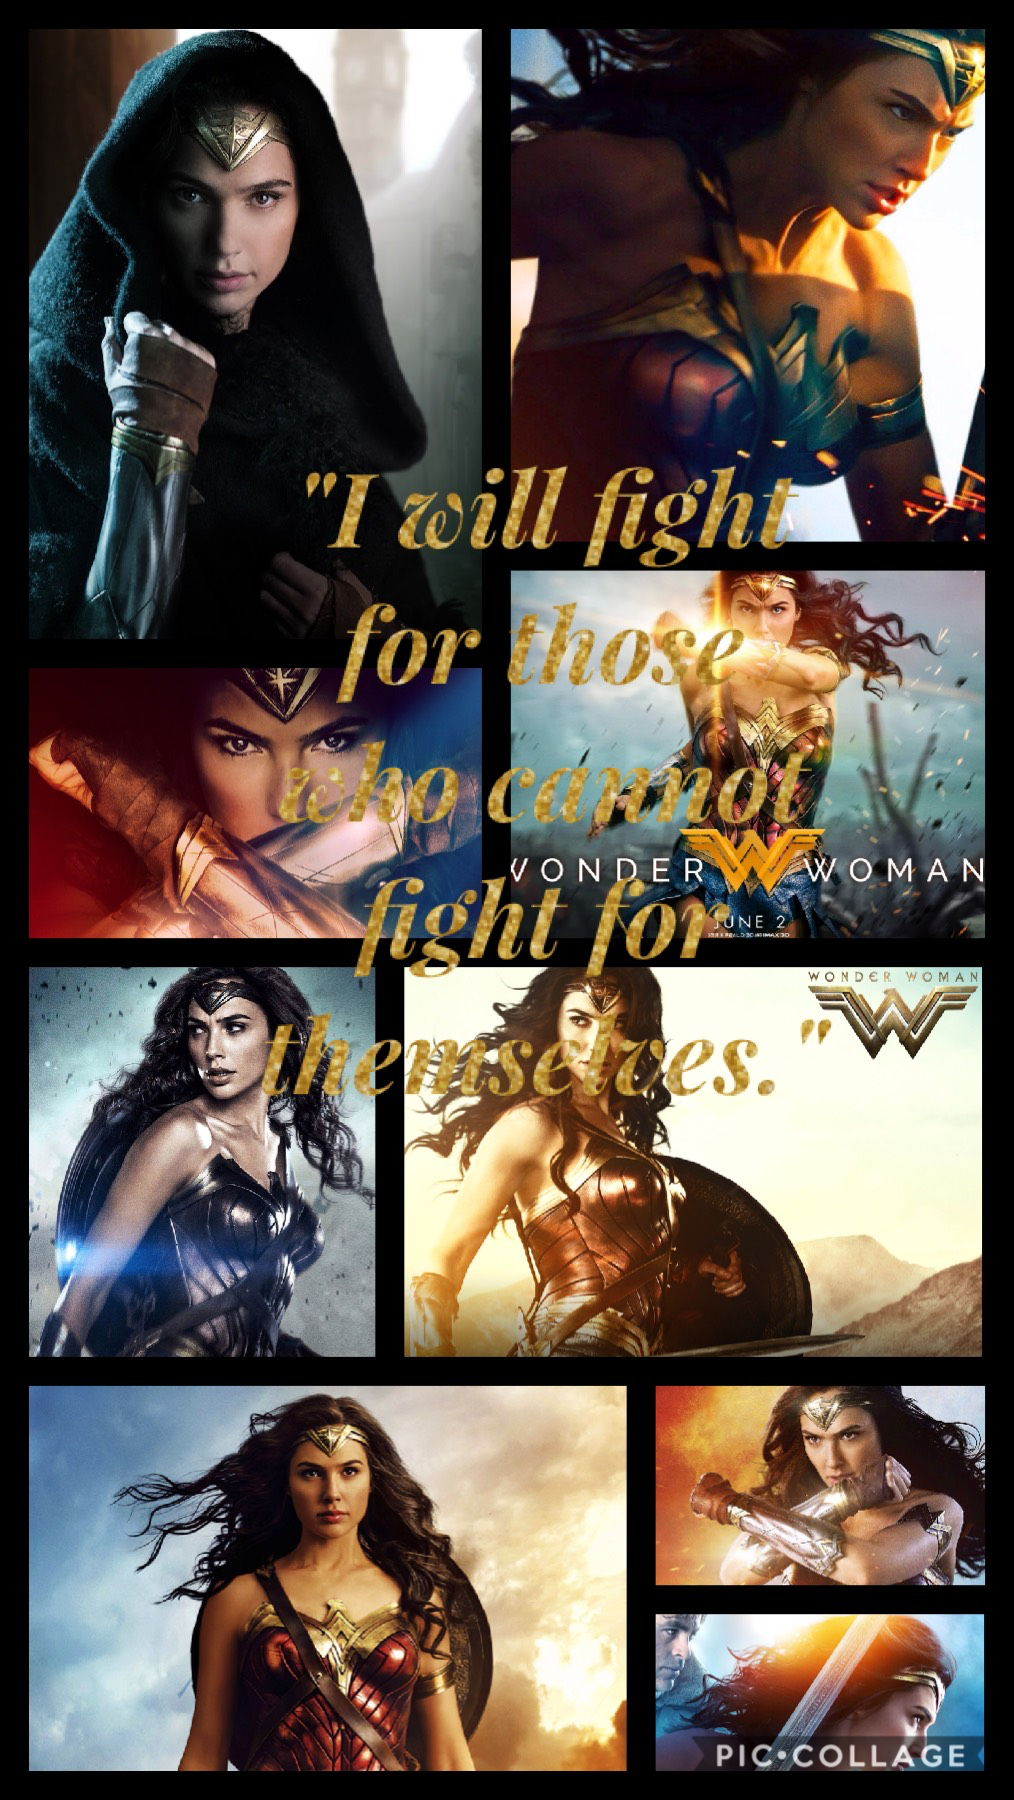 I love Wonder Woman!!! I just watched the movie and came up with the idea for a collage! Hope ya like it!